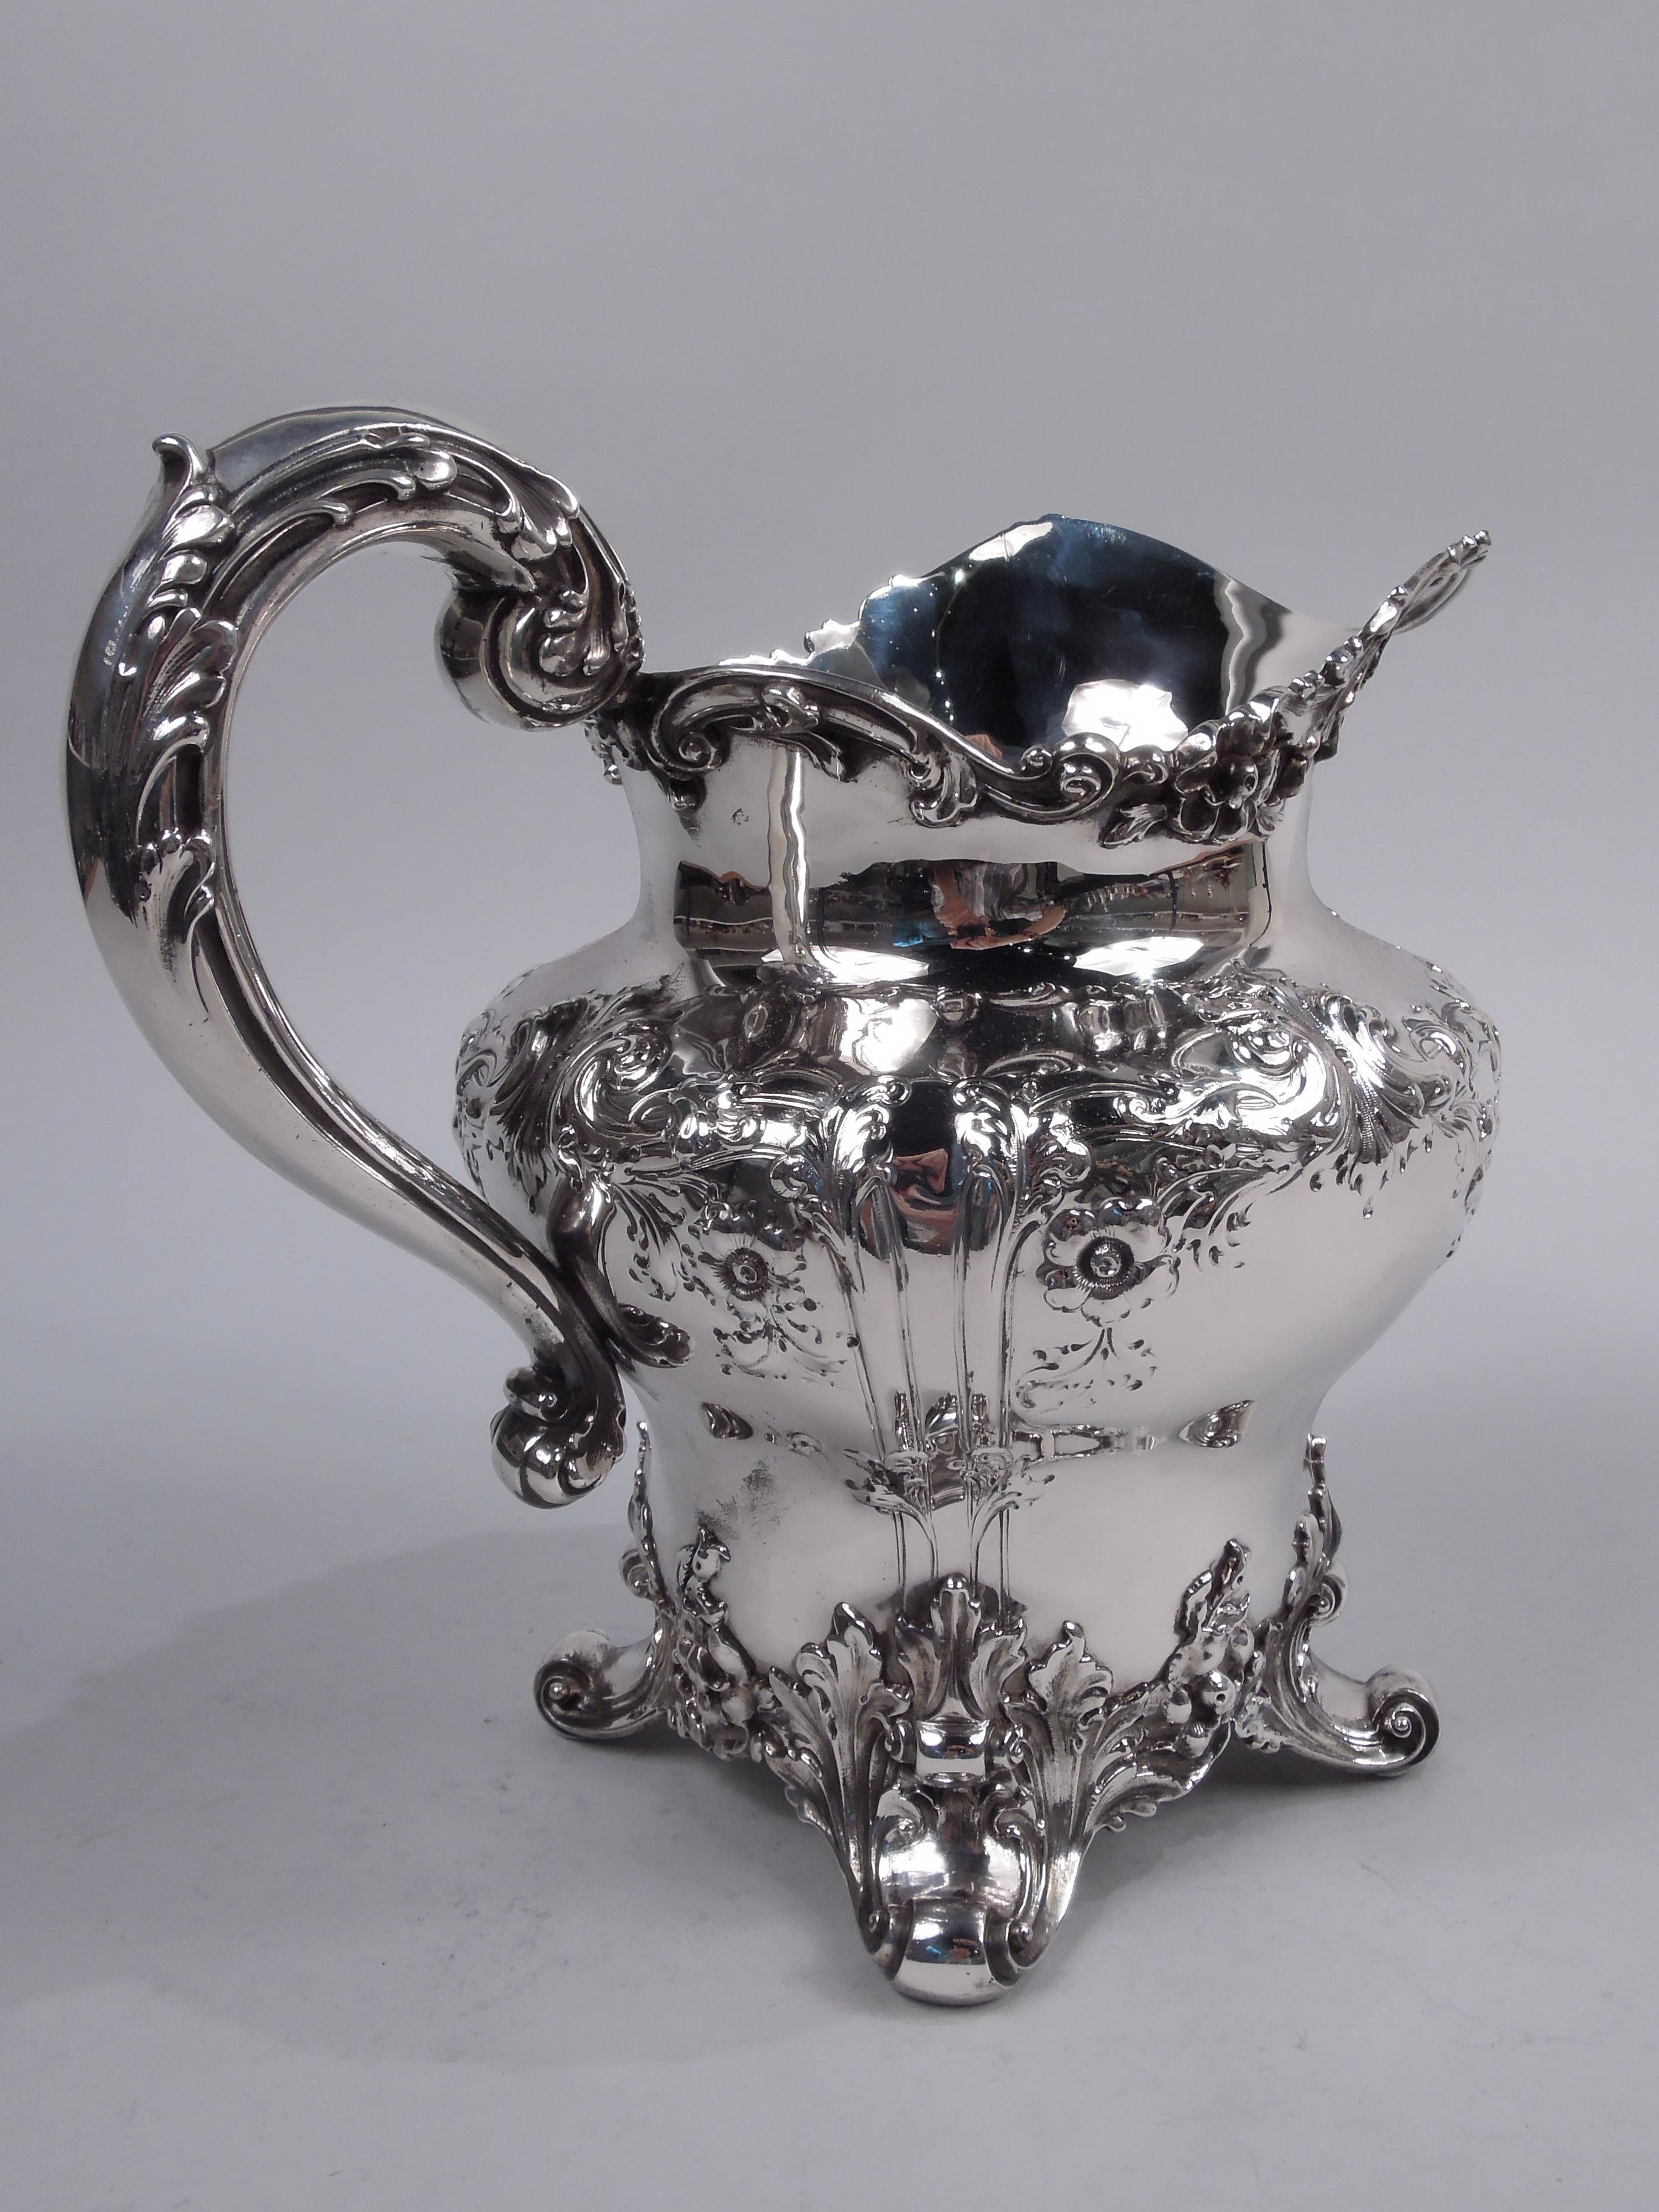 Pretty Edwardian Classical sterling silver water pitcher. Made by Graff, Washbourne & Dunn in New York, ca 1910. Wide-bodied baluster with helmet mouth, leaf-capped high-looping handle, and 4 leaf-mounted volute scroll supports. Chased frames